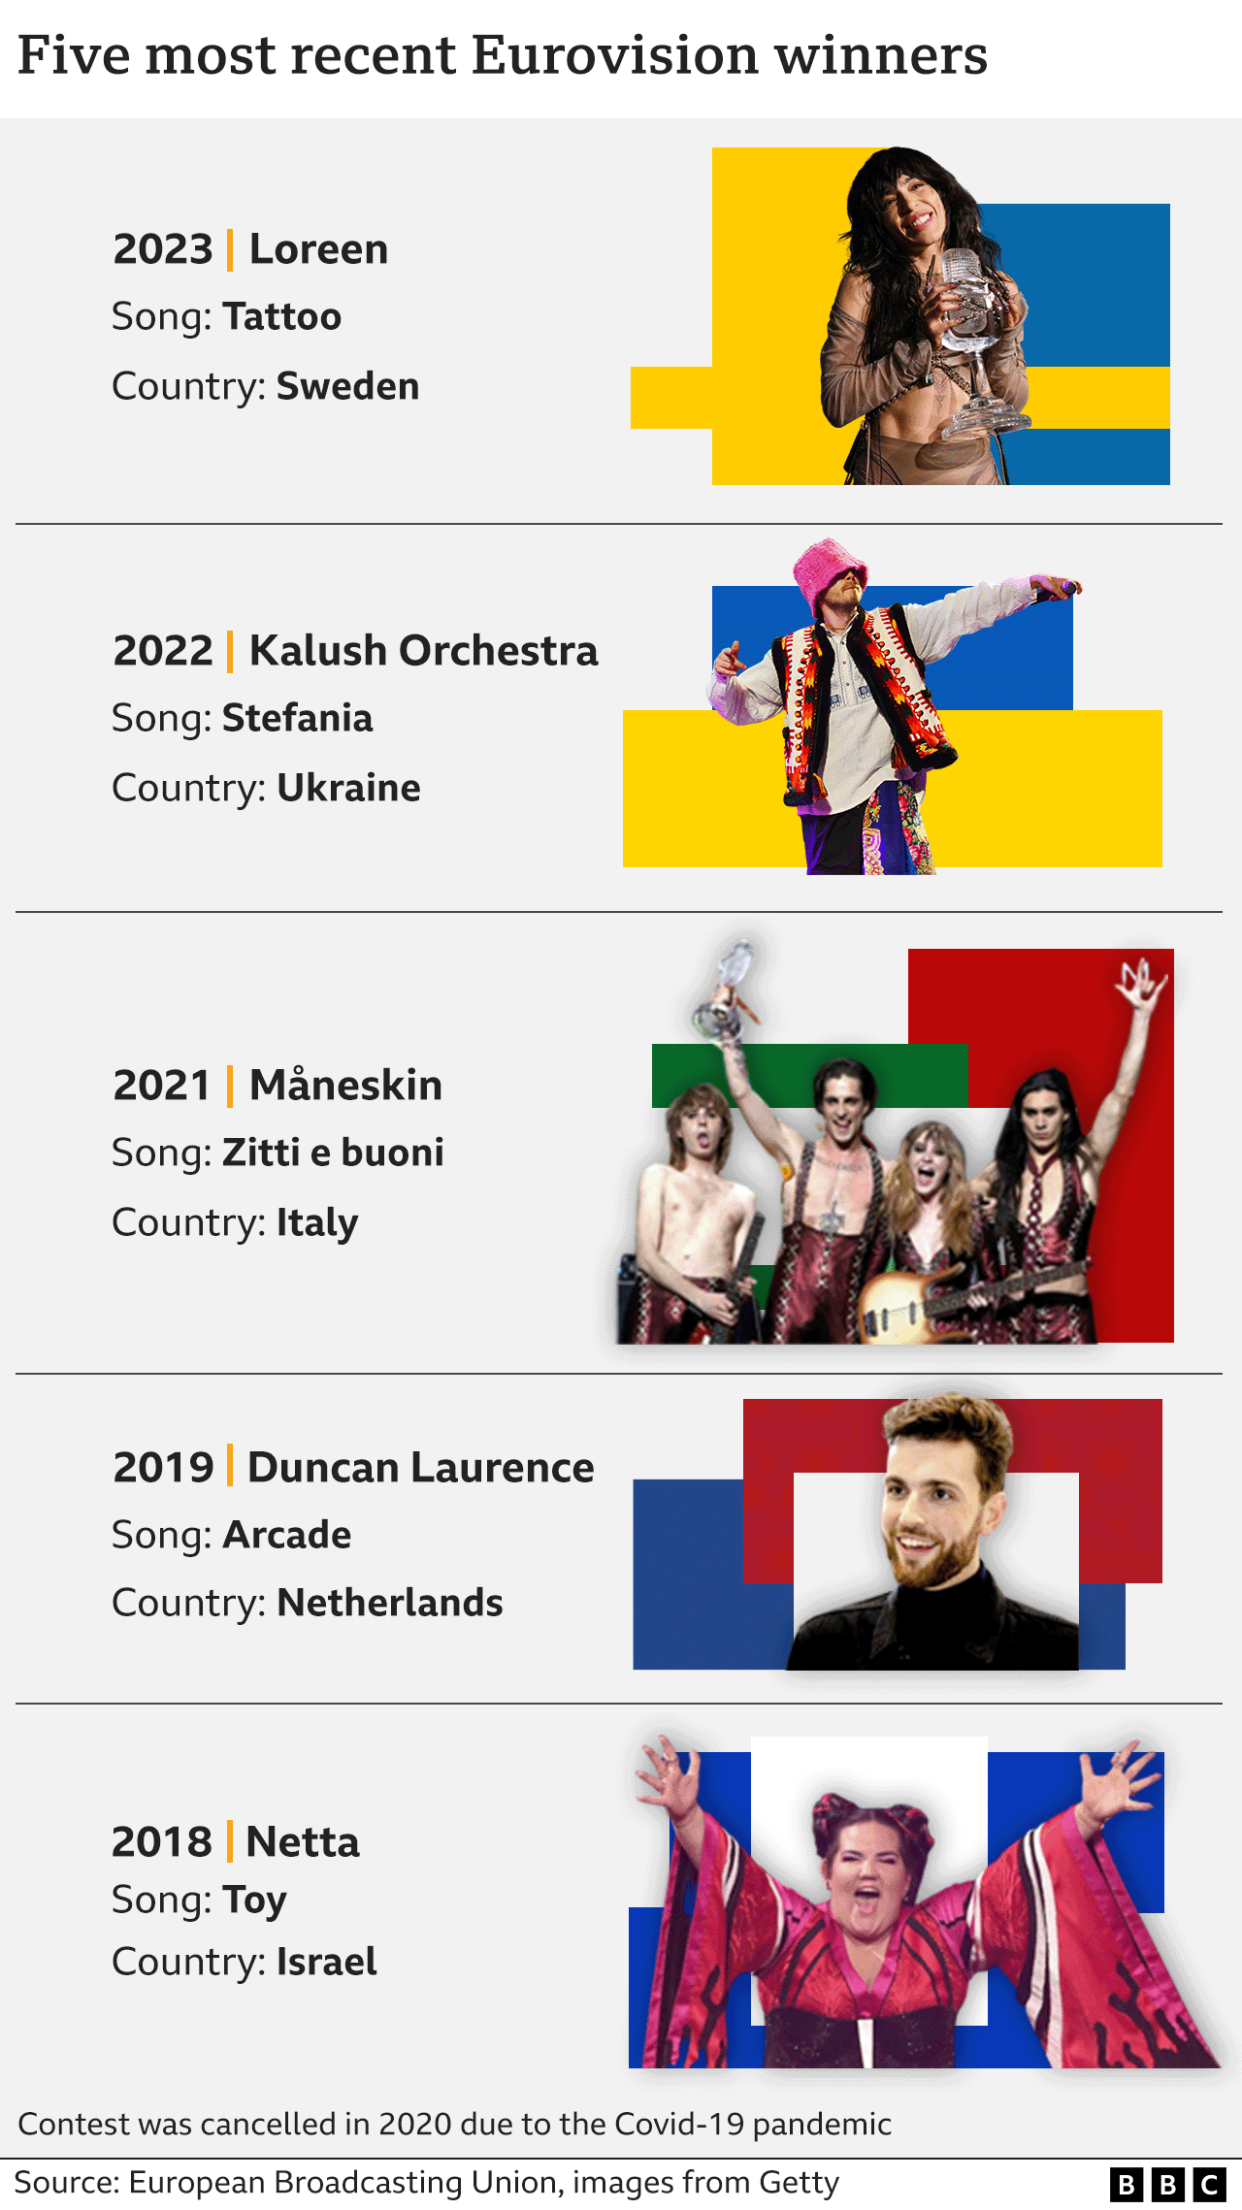 The five most recent Eurovision winners